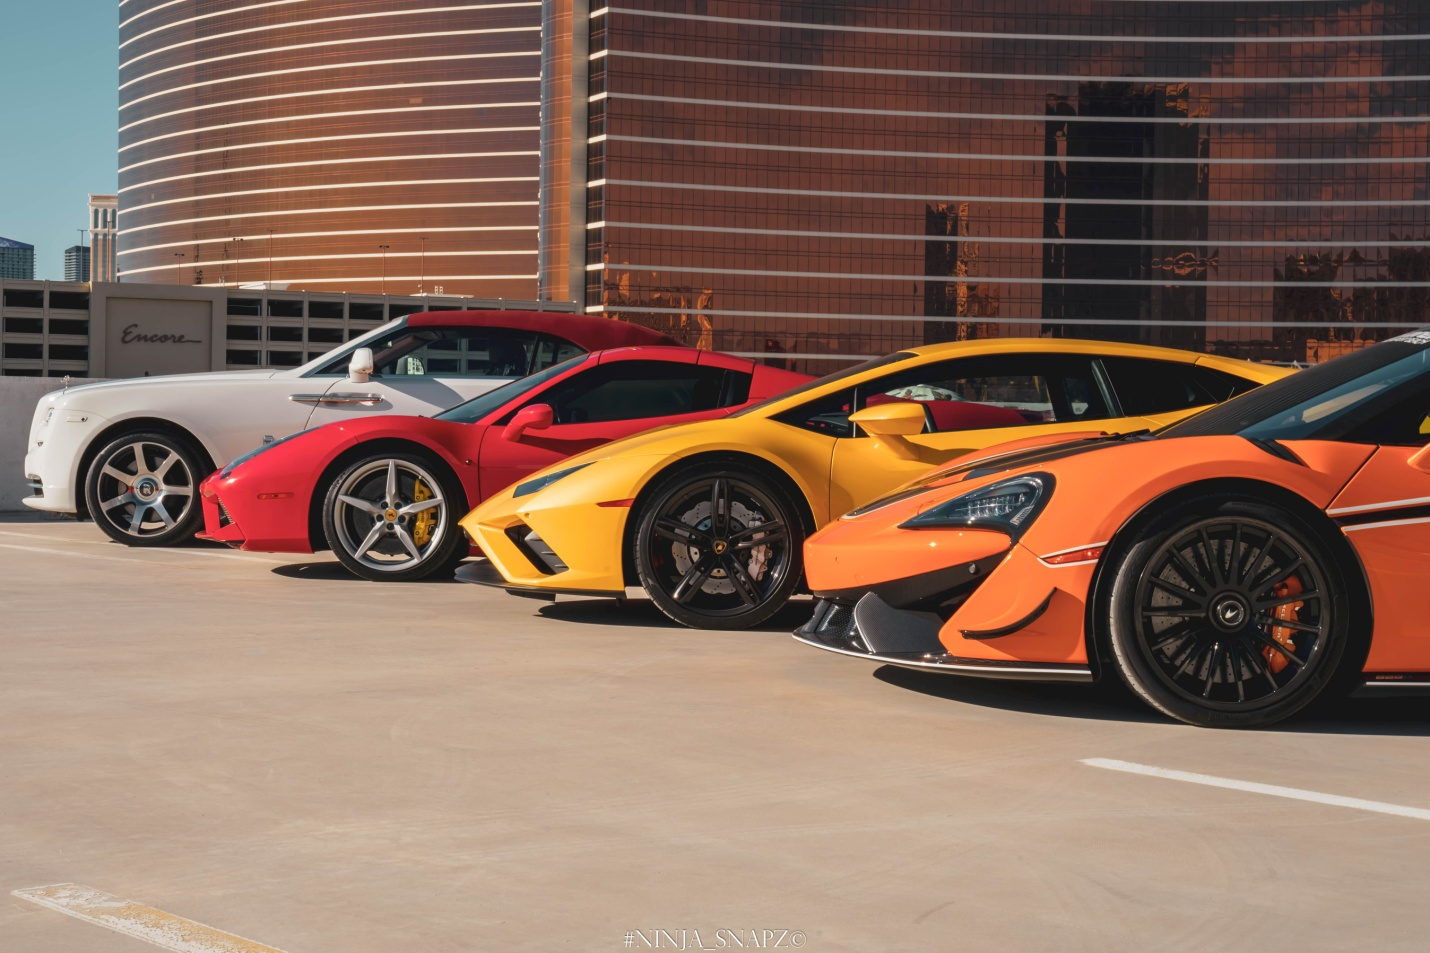 A fleet of expensive rental cars outside LVC Exotic Rentals